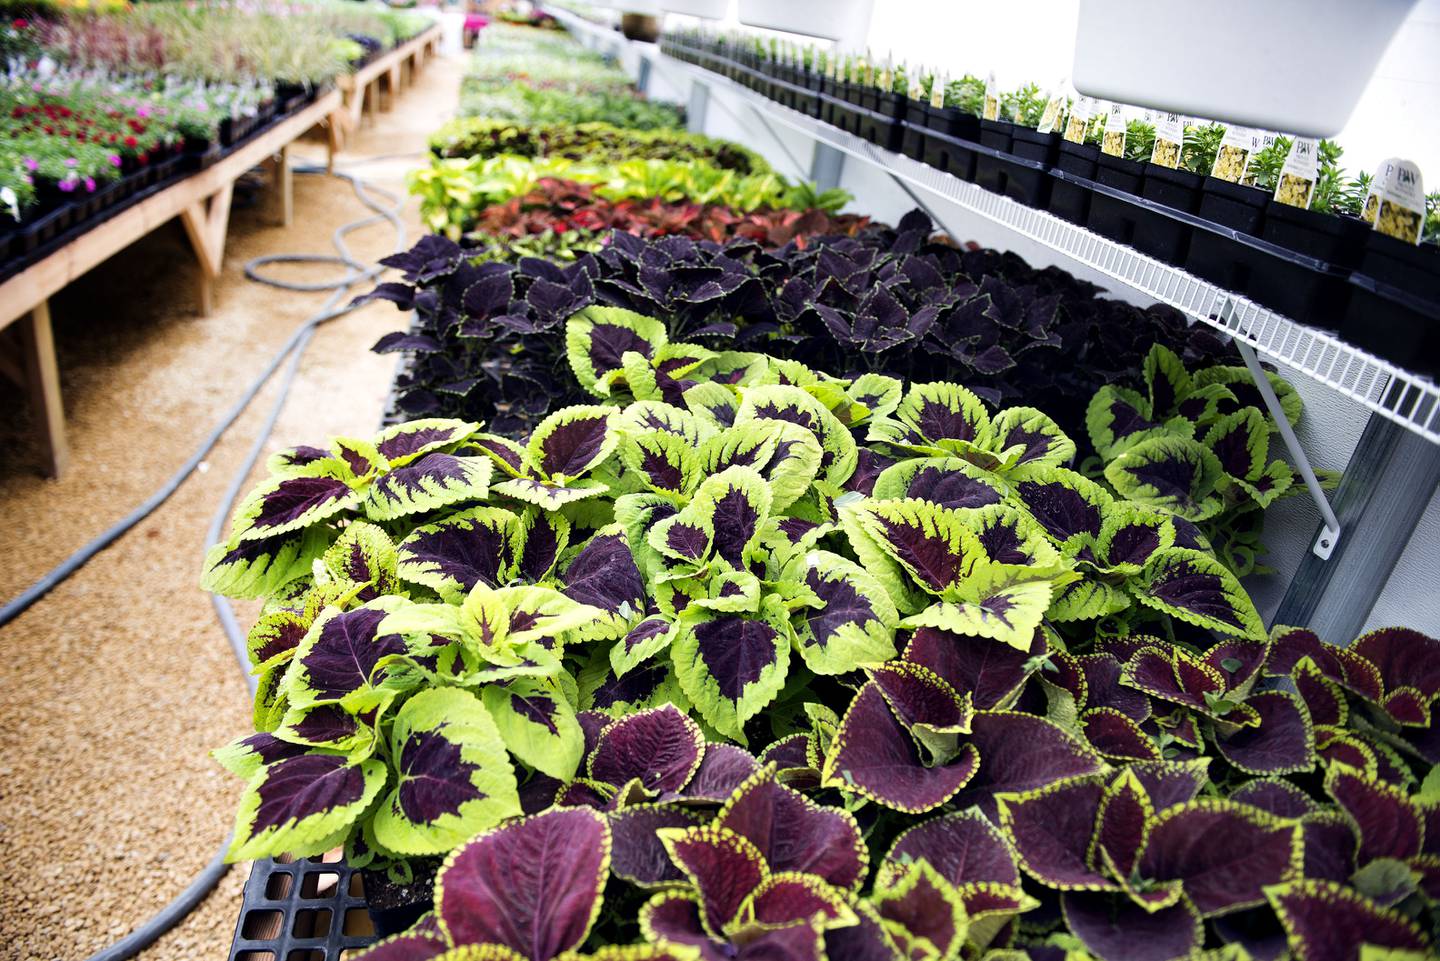 Colorful plants and flowers fill the greenhouse from front to back.